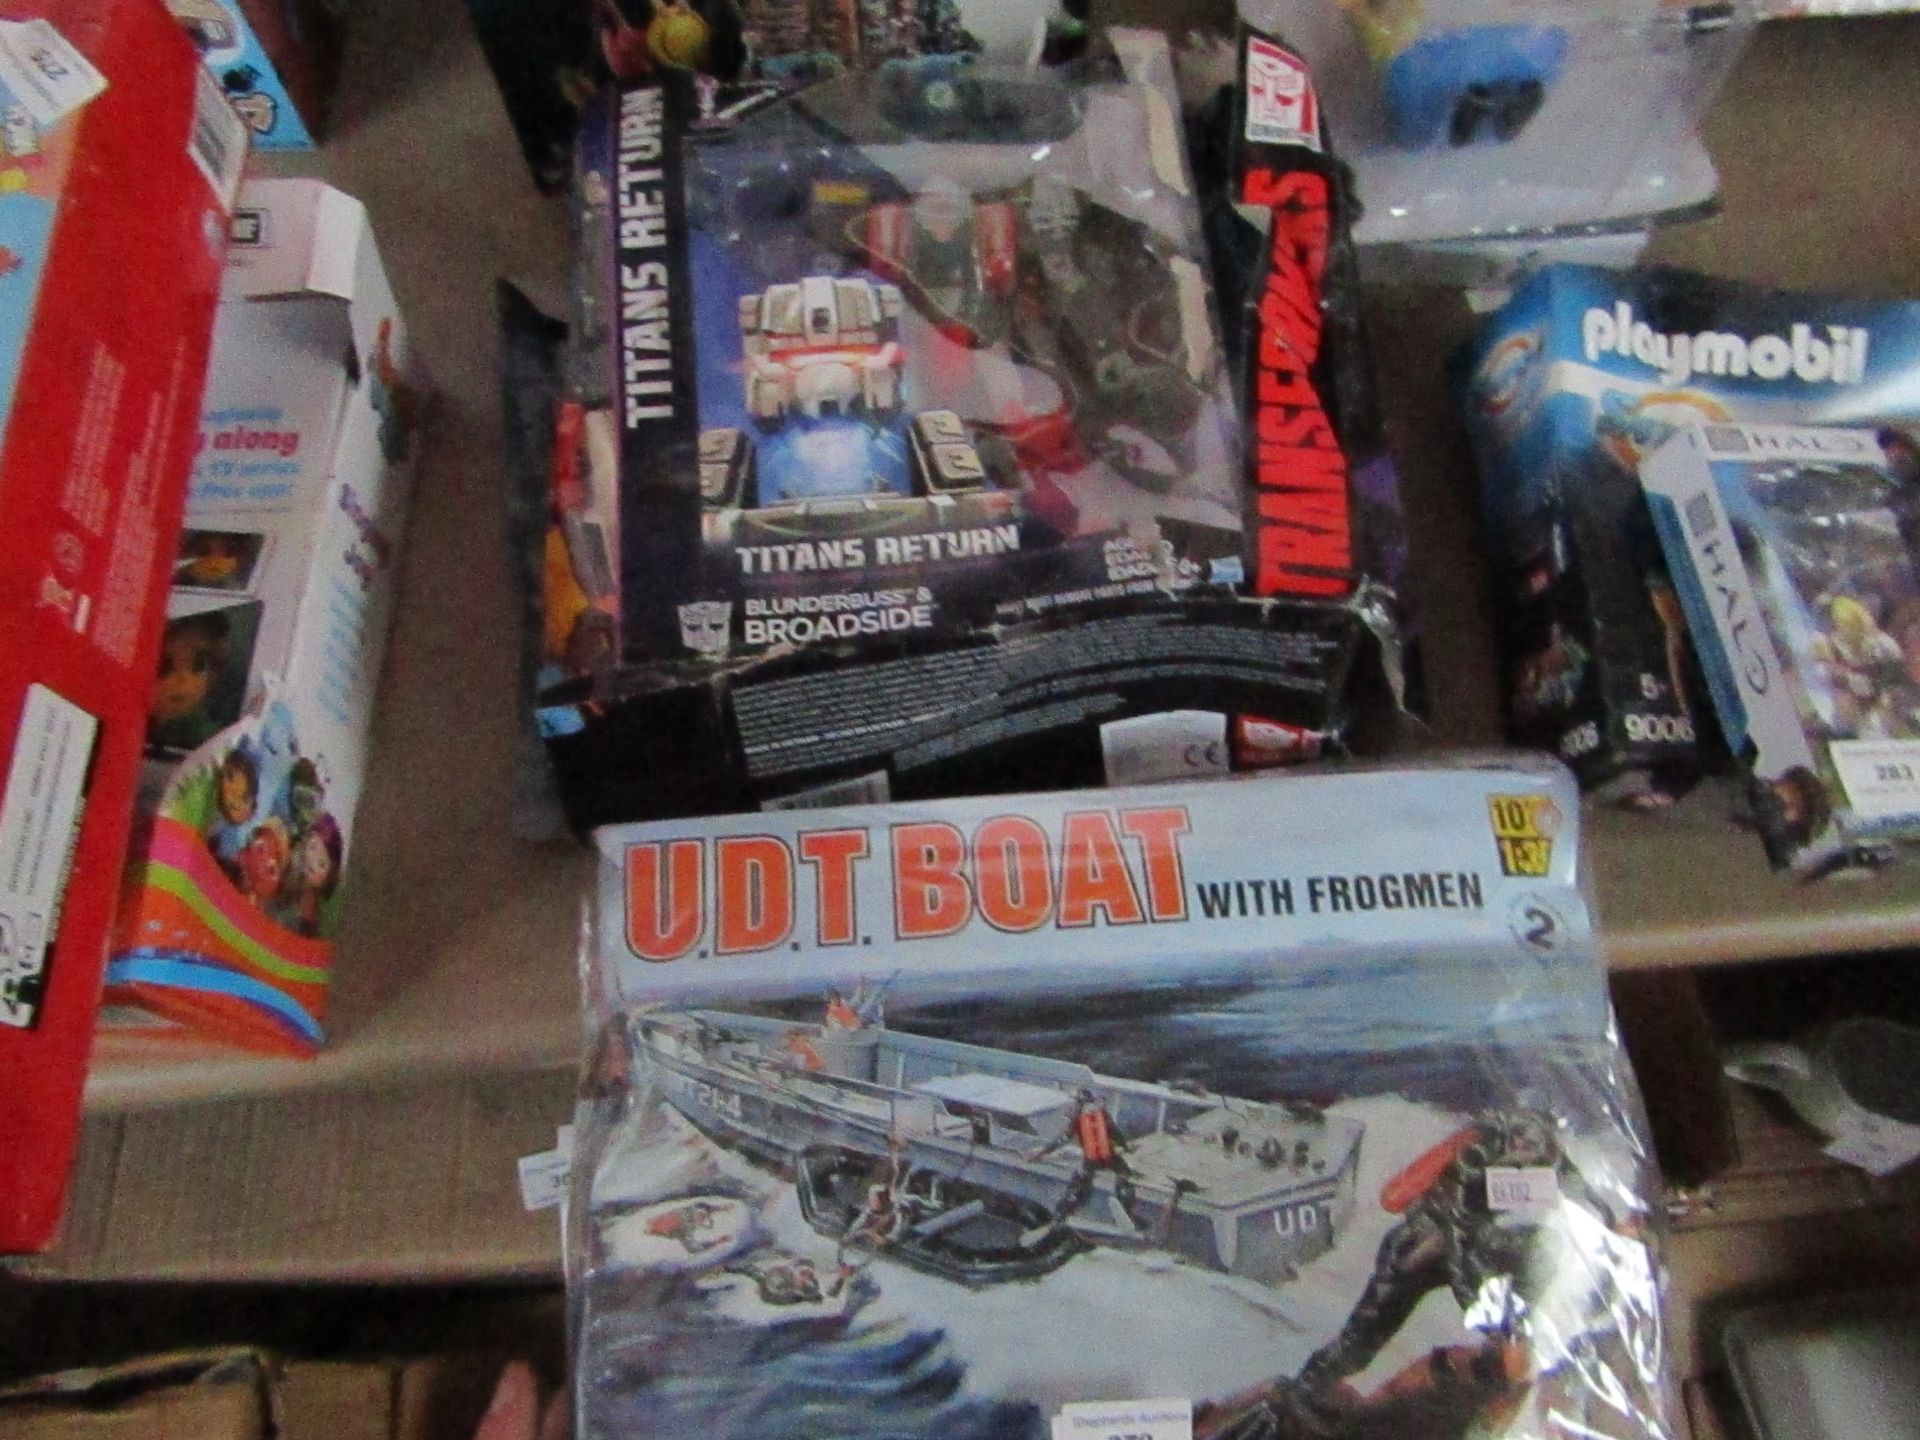 2x Items being a Revell UDT model boat set and a Transformers toy.